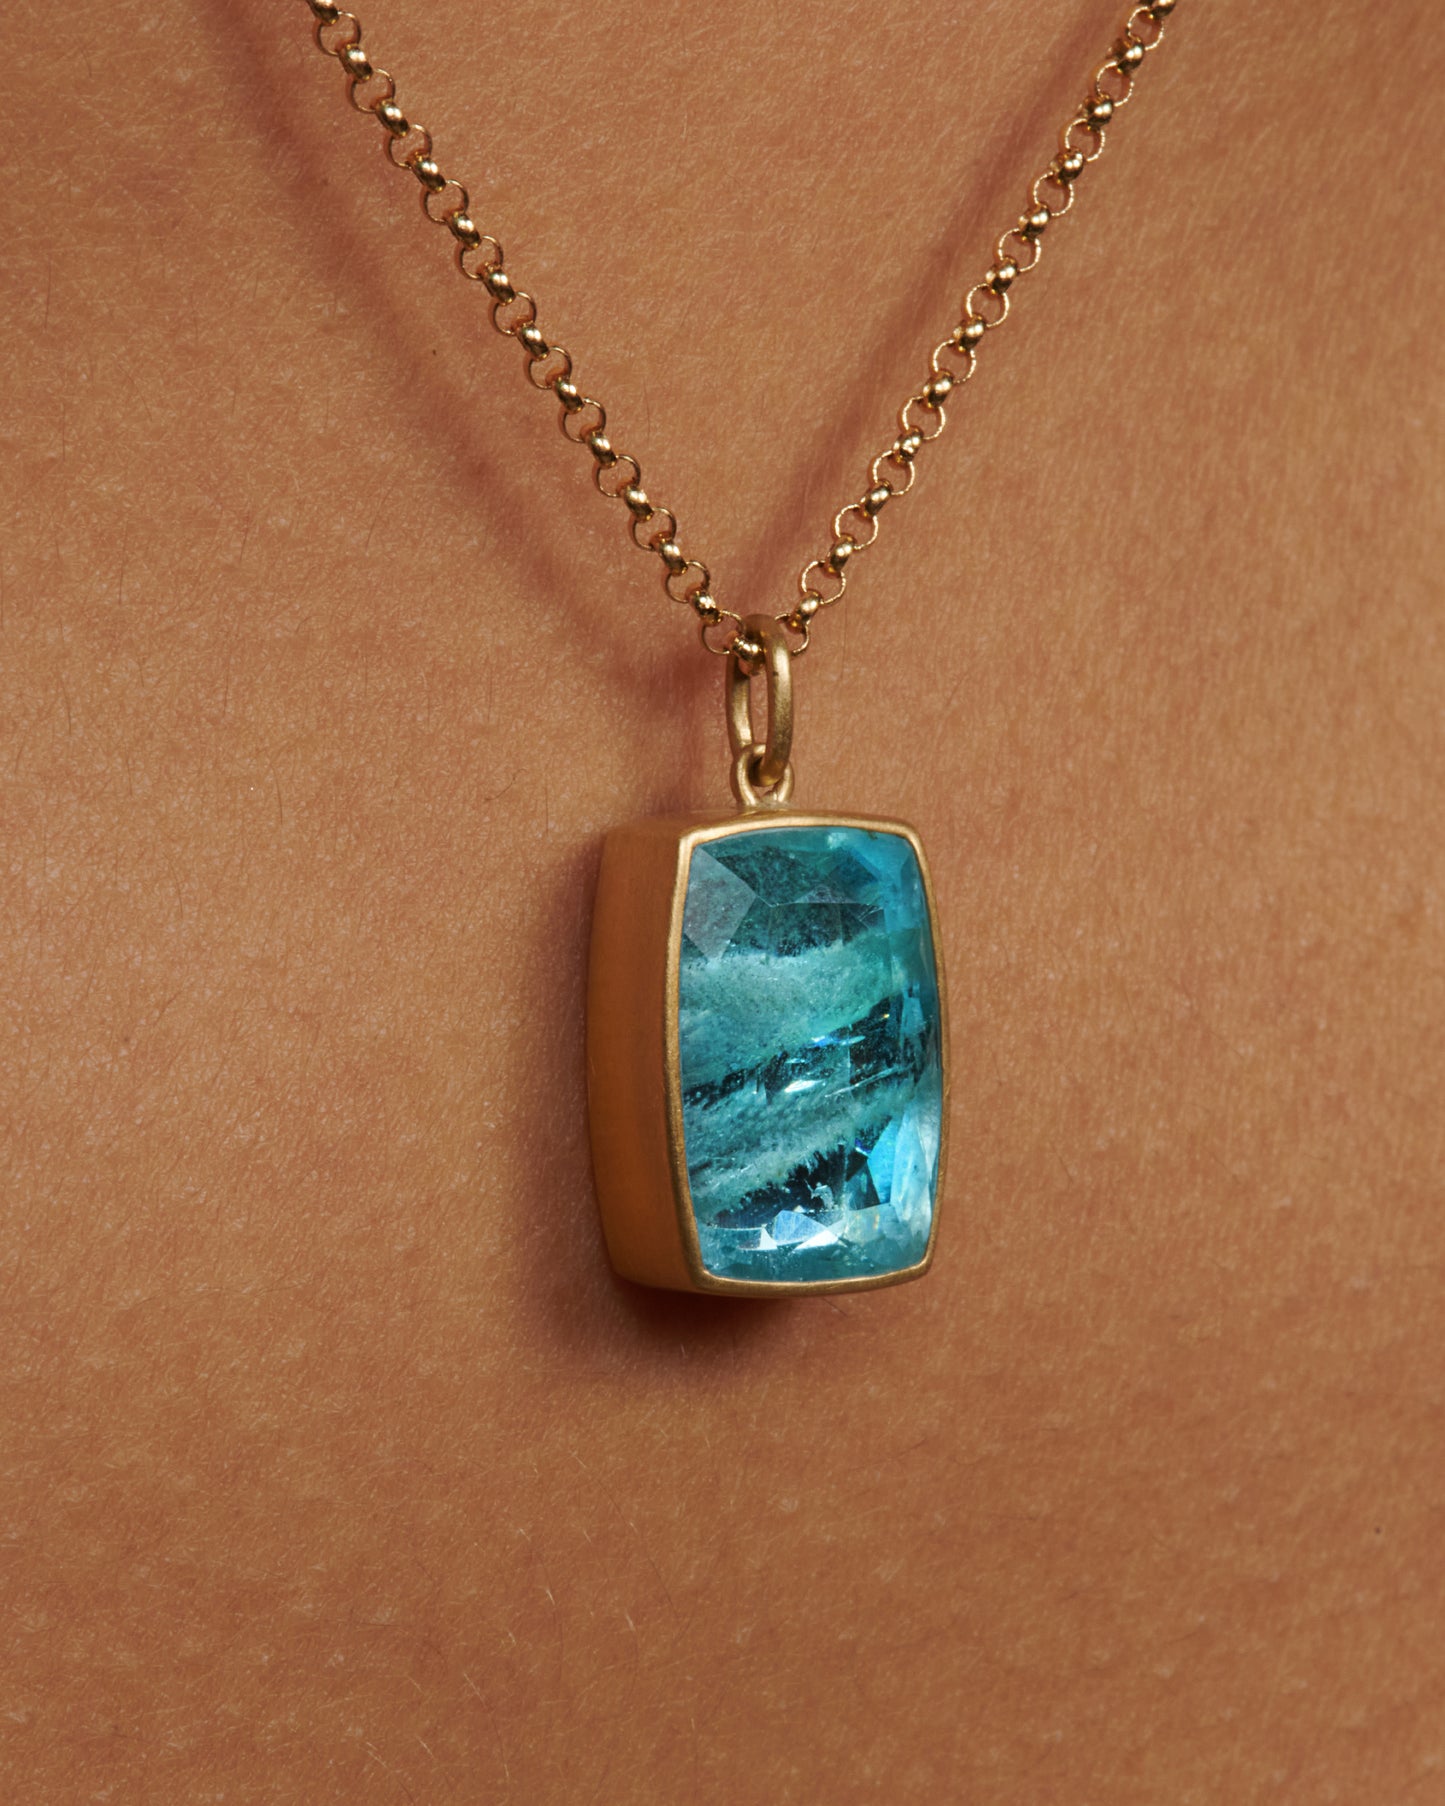 A close up of a cushion shaped aquamarine pendant with a yellow gold bezel on a gold chain on a neck.